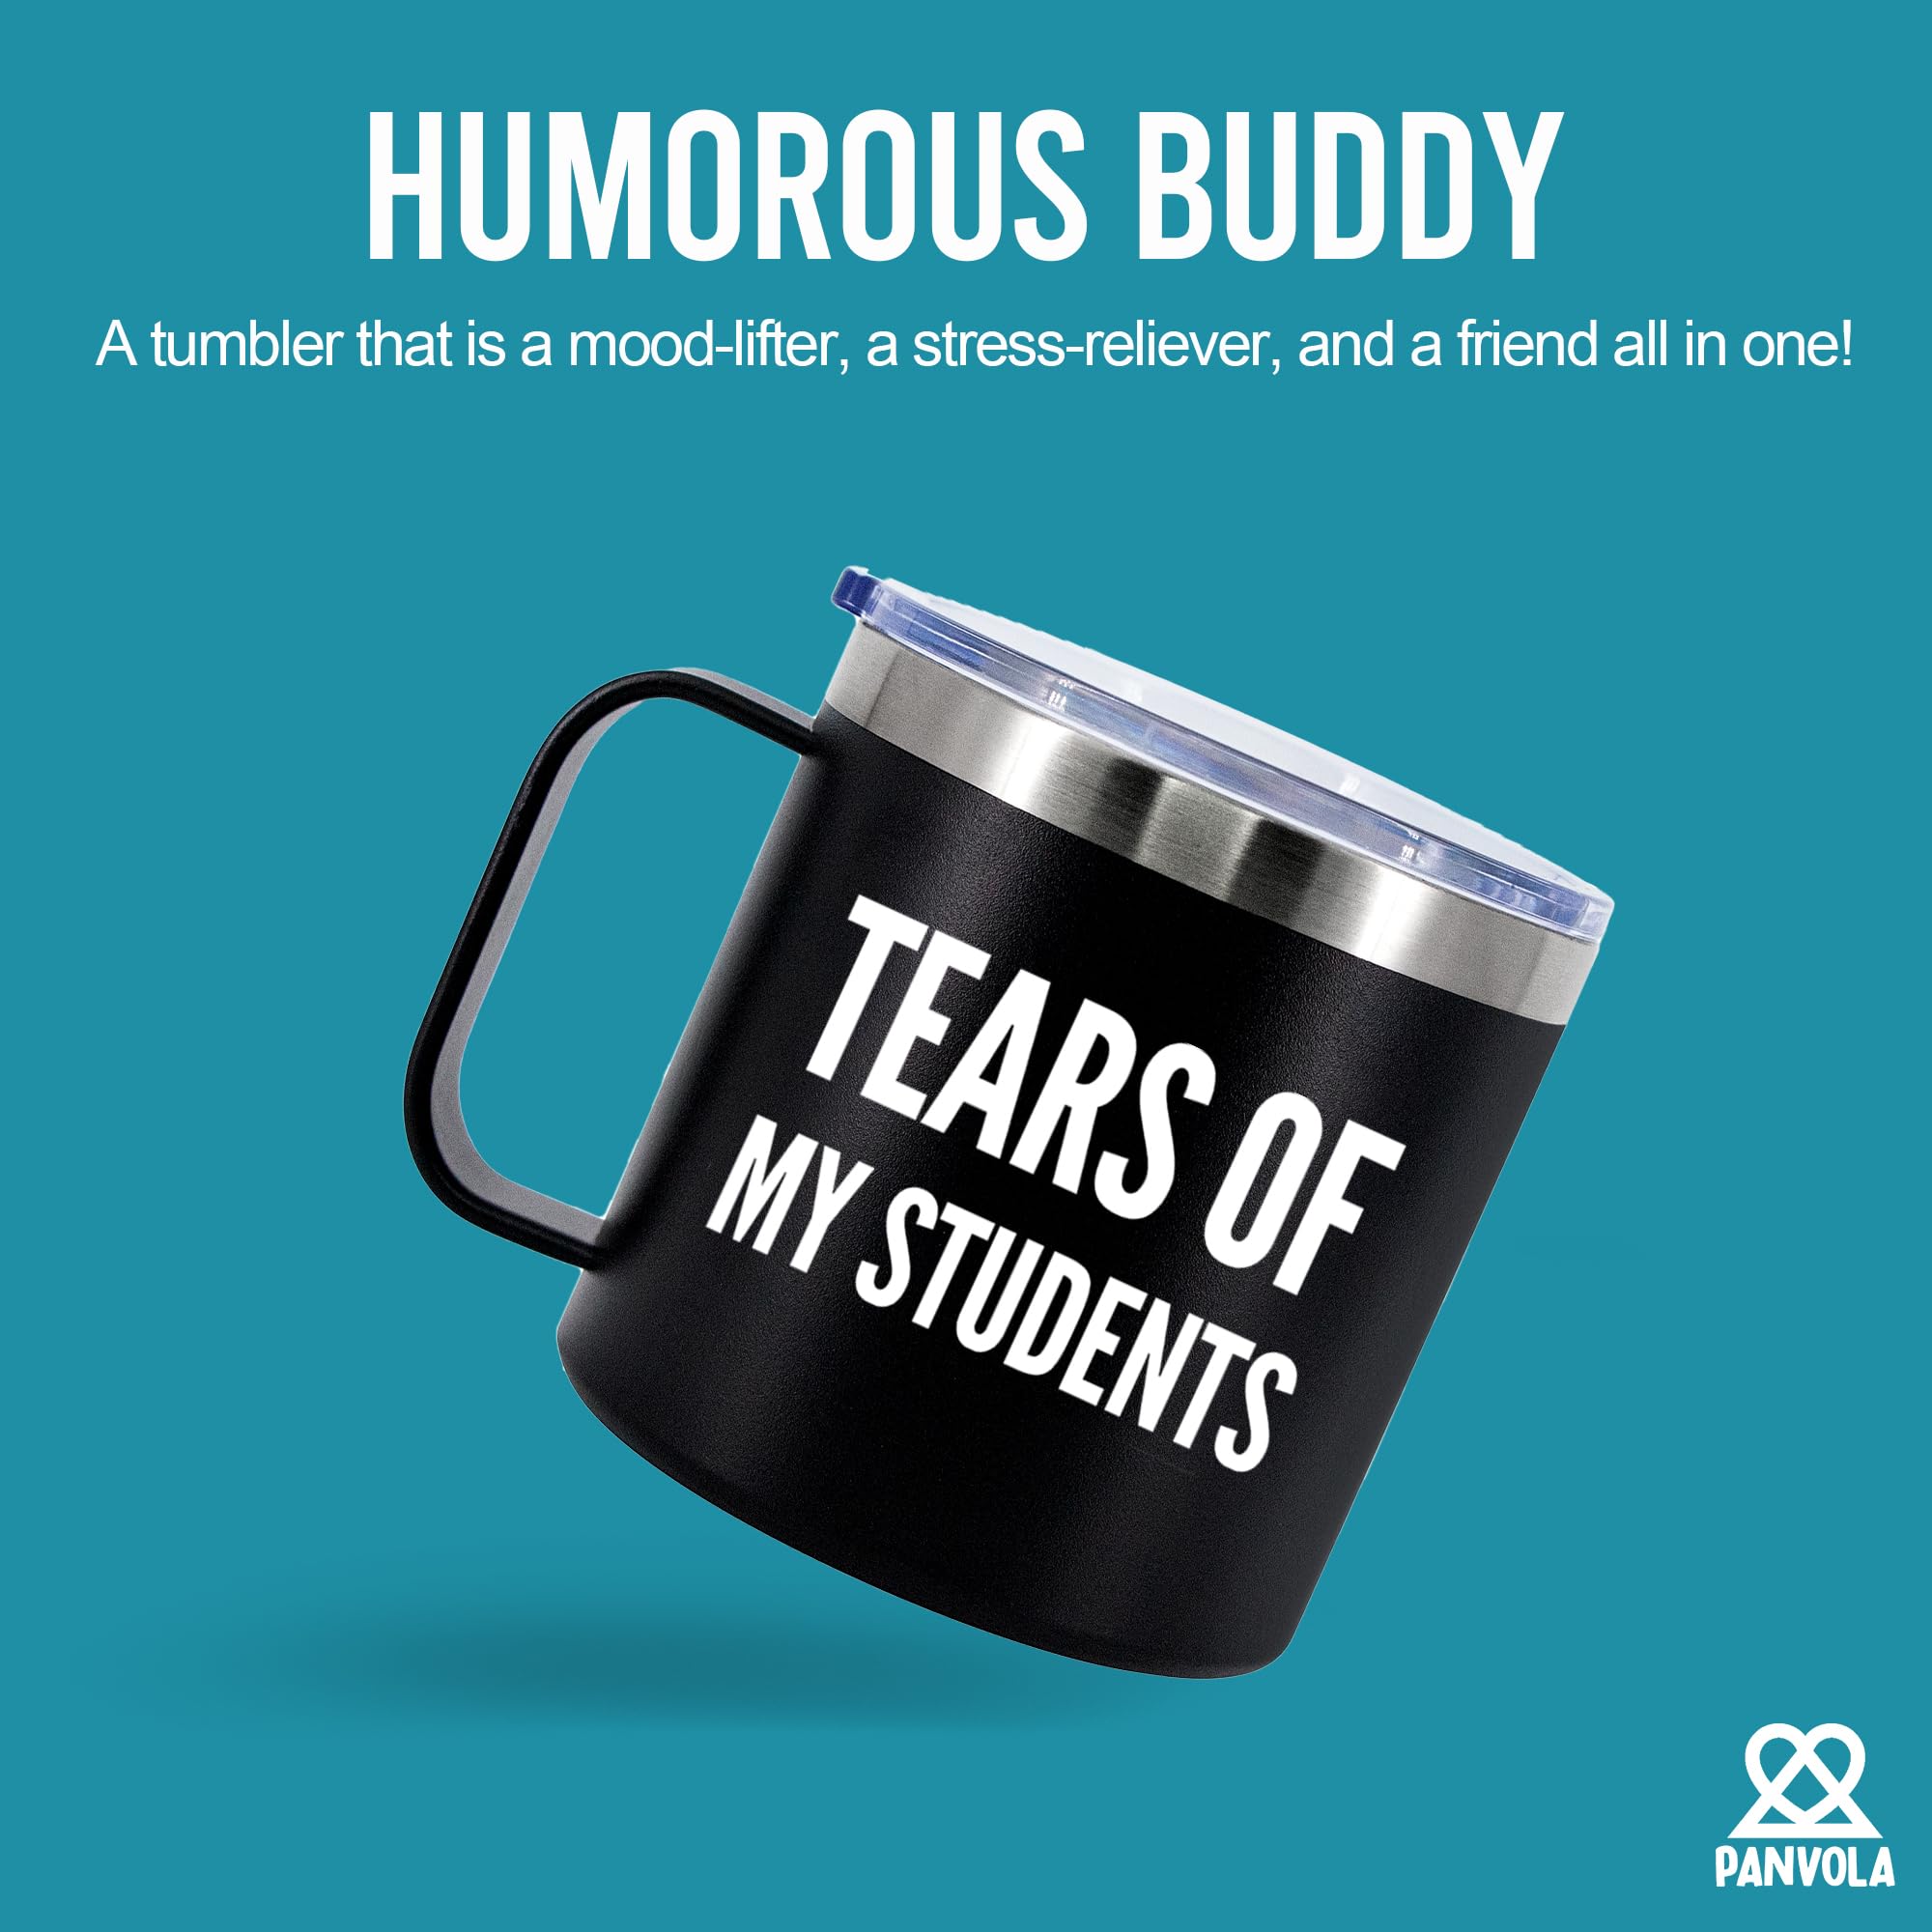 Tears Of My Students Teacher Gifts From Students Funny Professor Graduation Teacher Appreciation Day 304 Stainless Steel Vacuum Insulated Camping Travel Thermal Mug Coffee Cup 14oz With Handle Lid